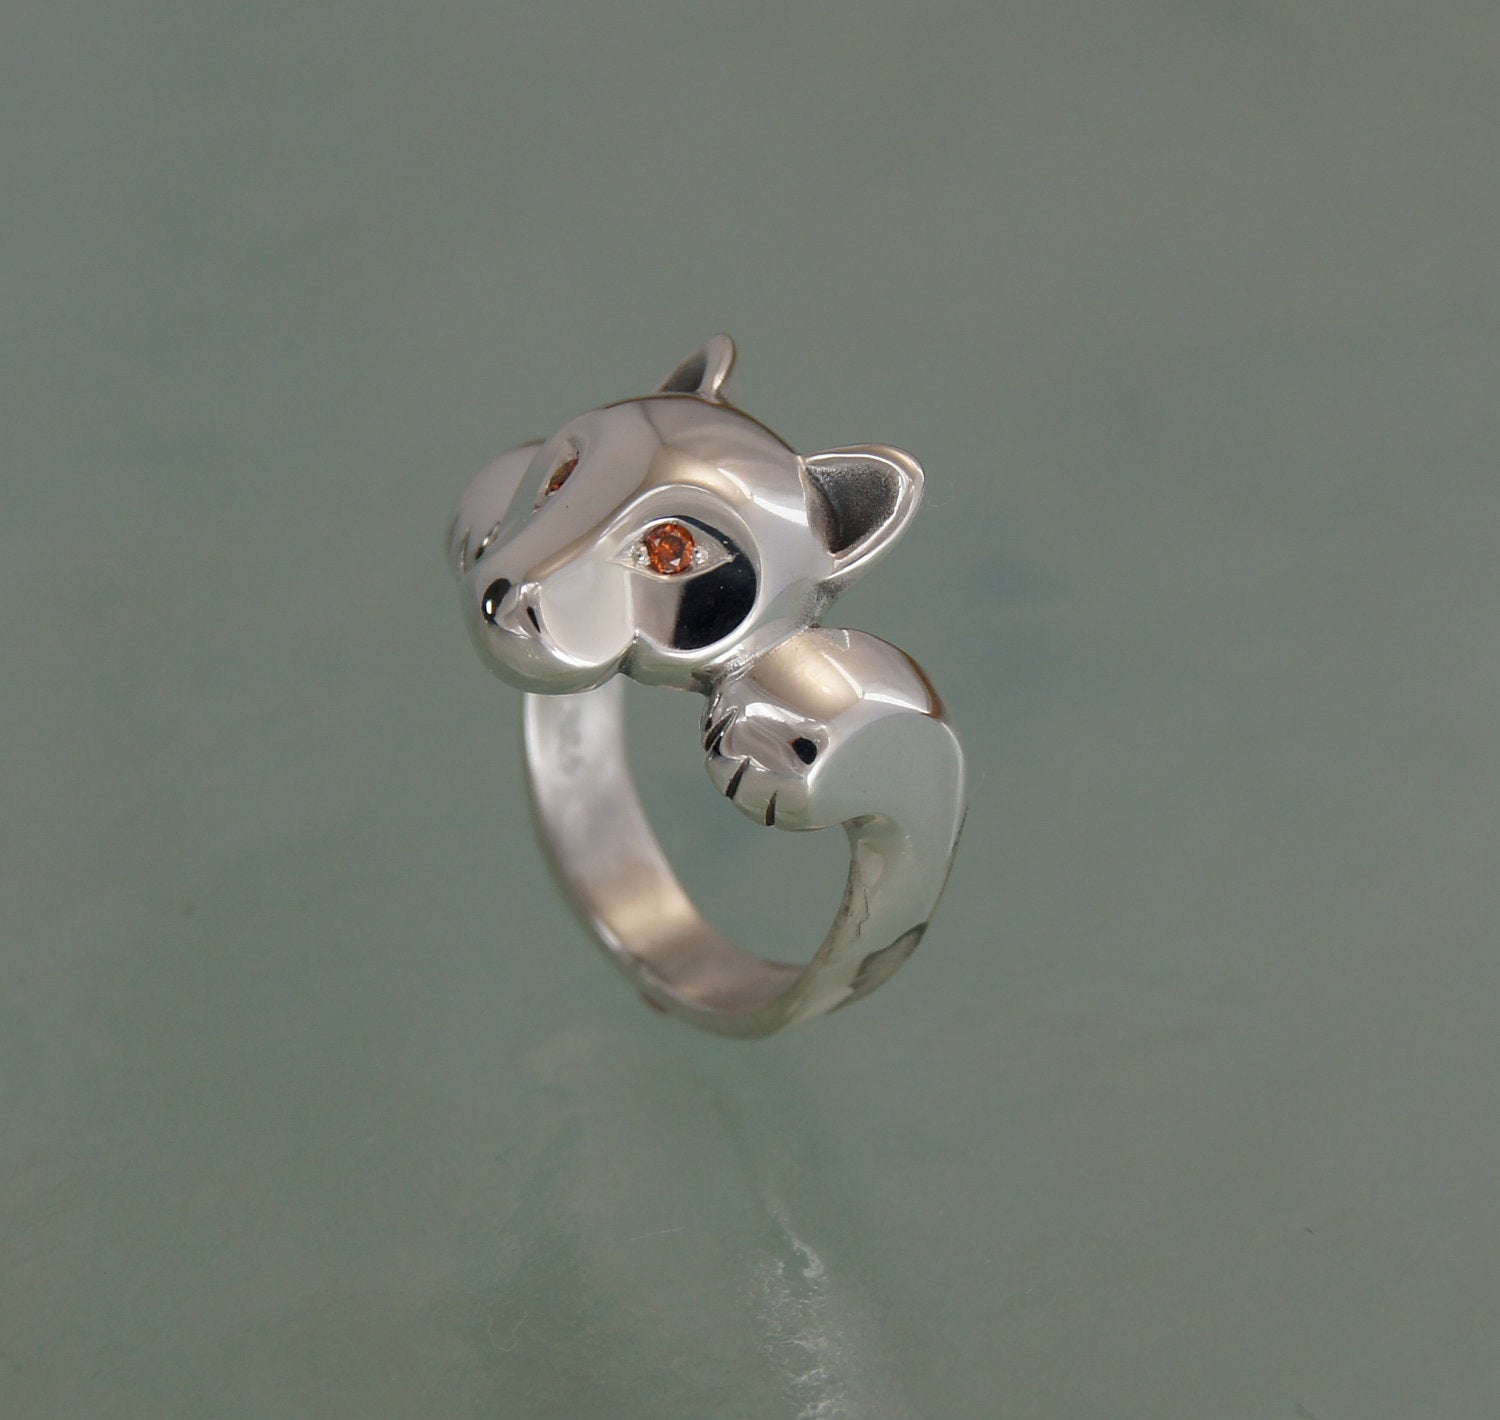 leaping puma silver ring with gemstone eyes